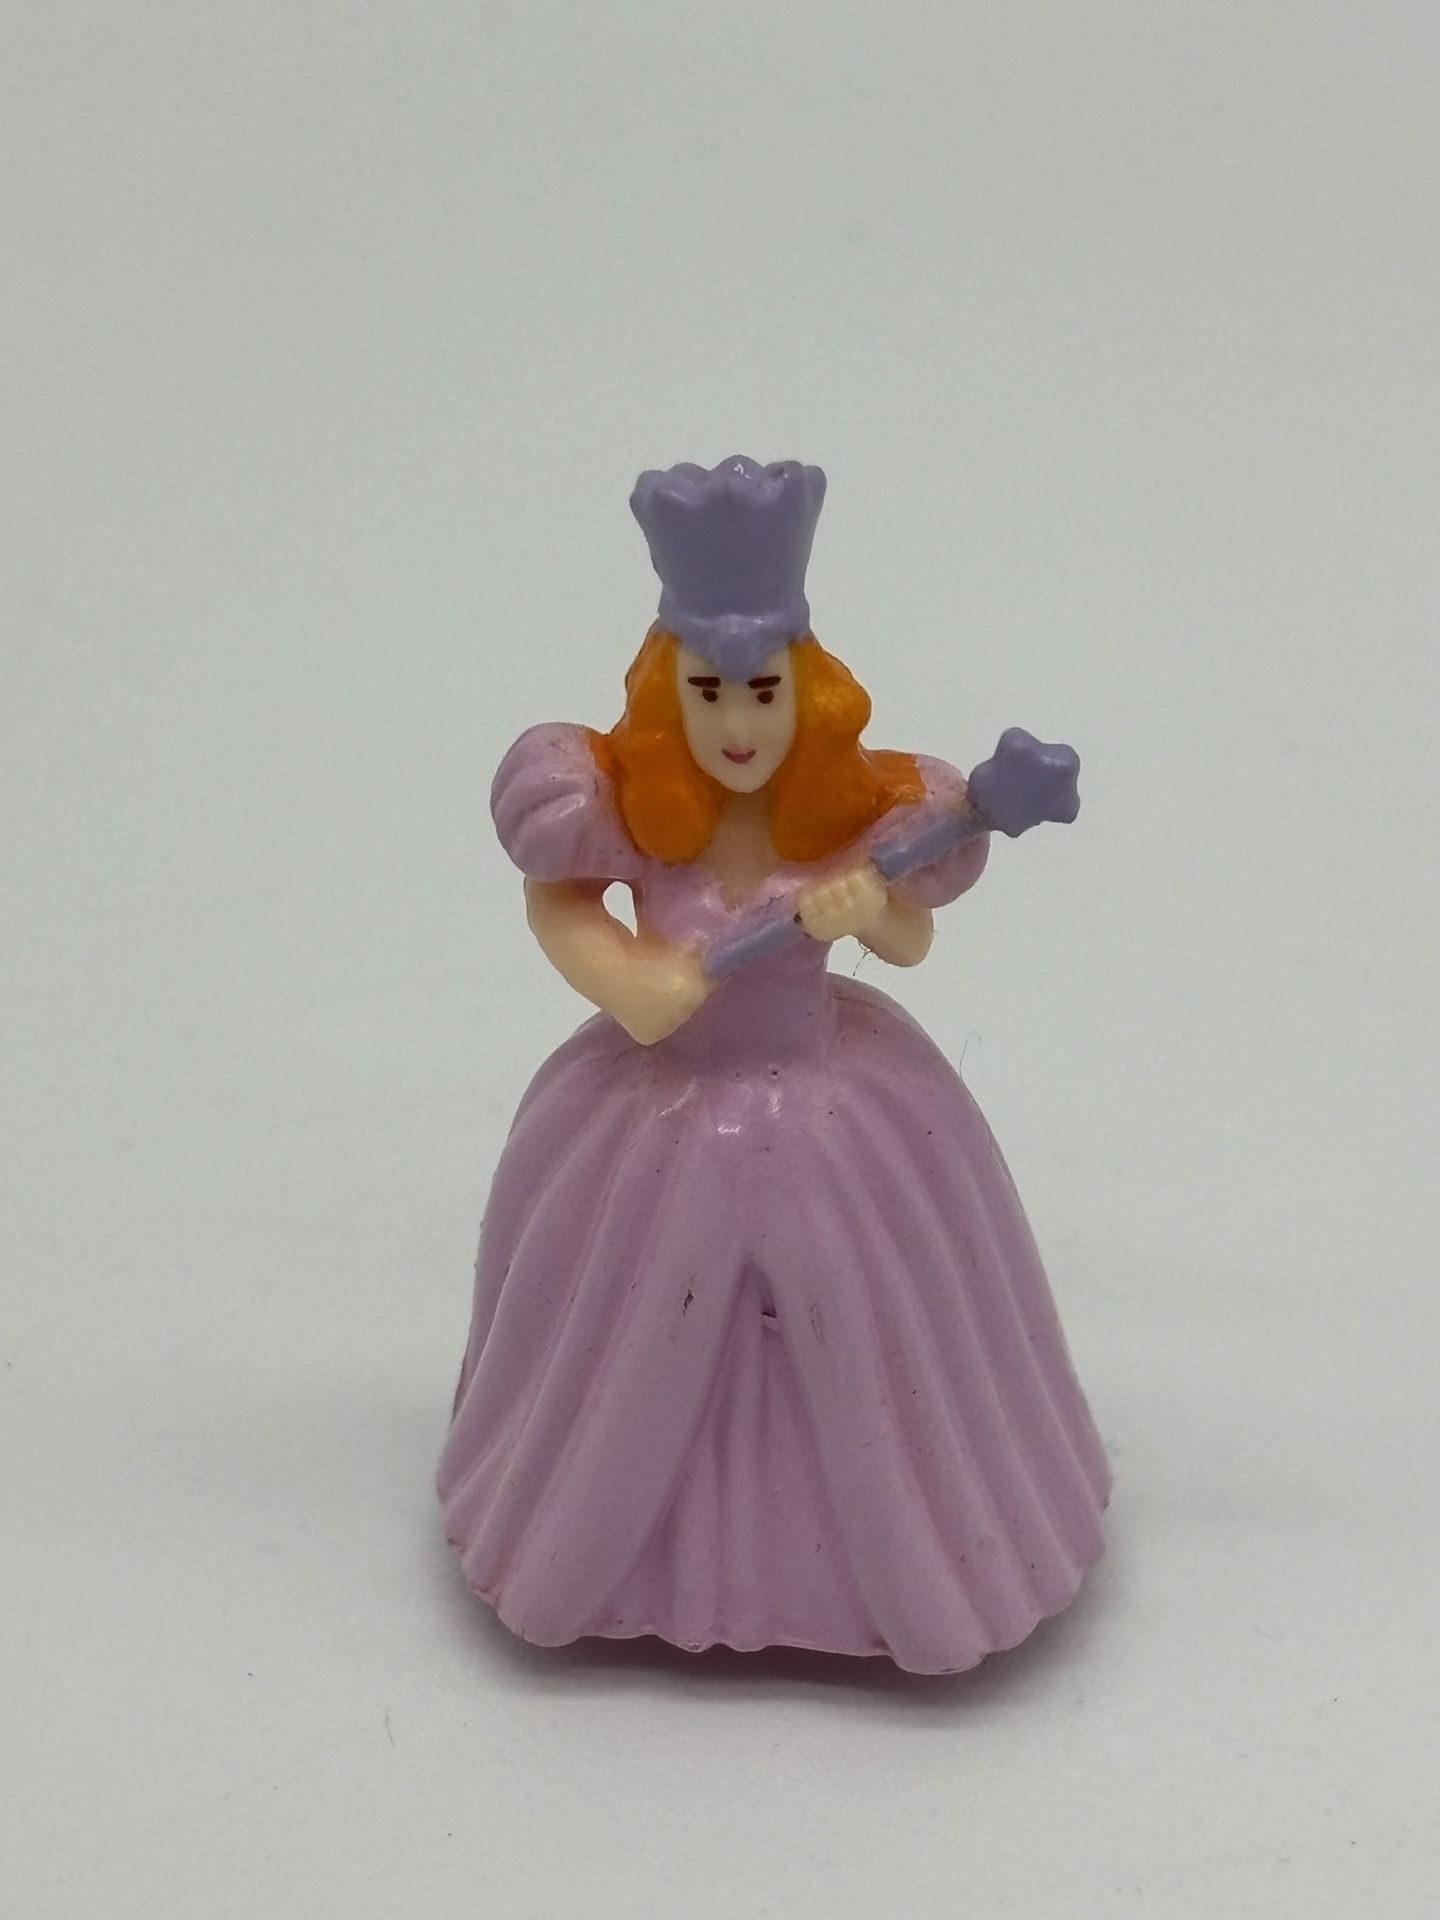 Polly Pocket Wizard of Oz Glinda the Good Witch Emerald City Playset Figure